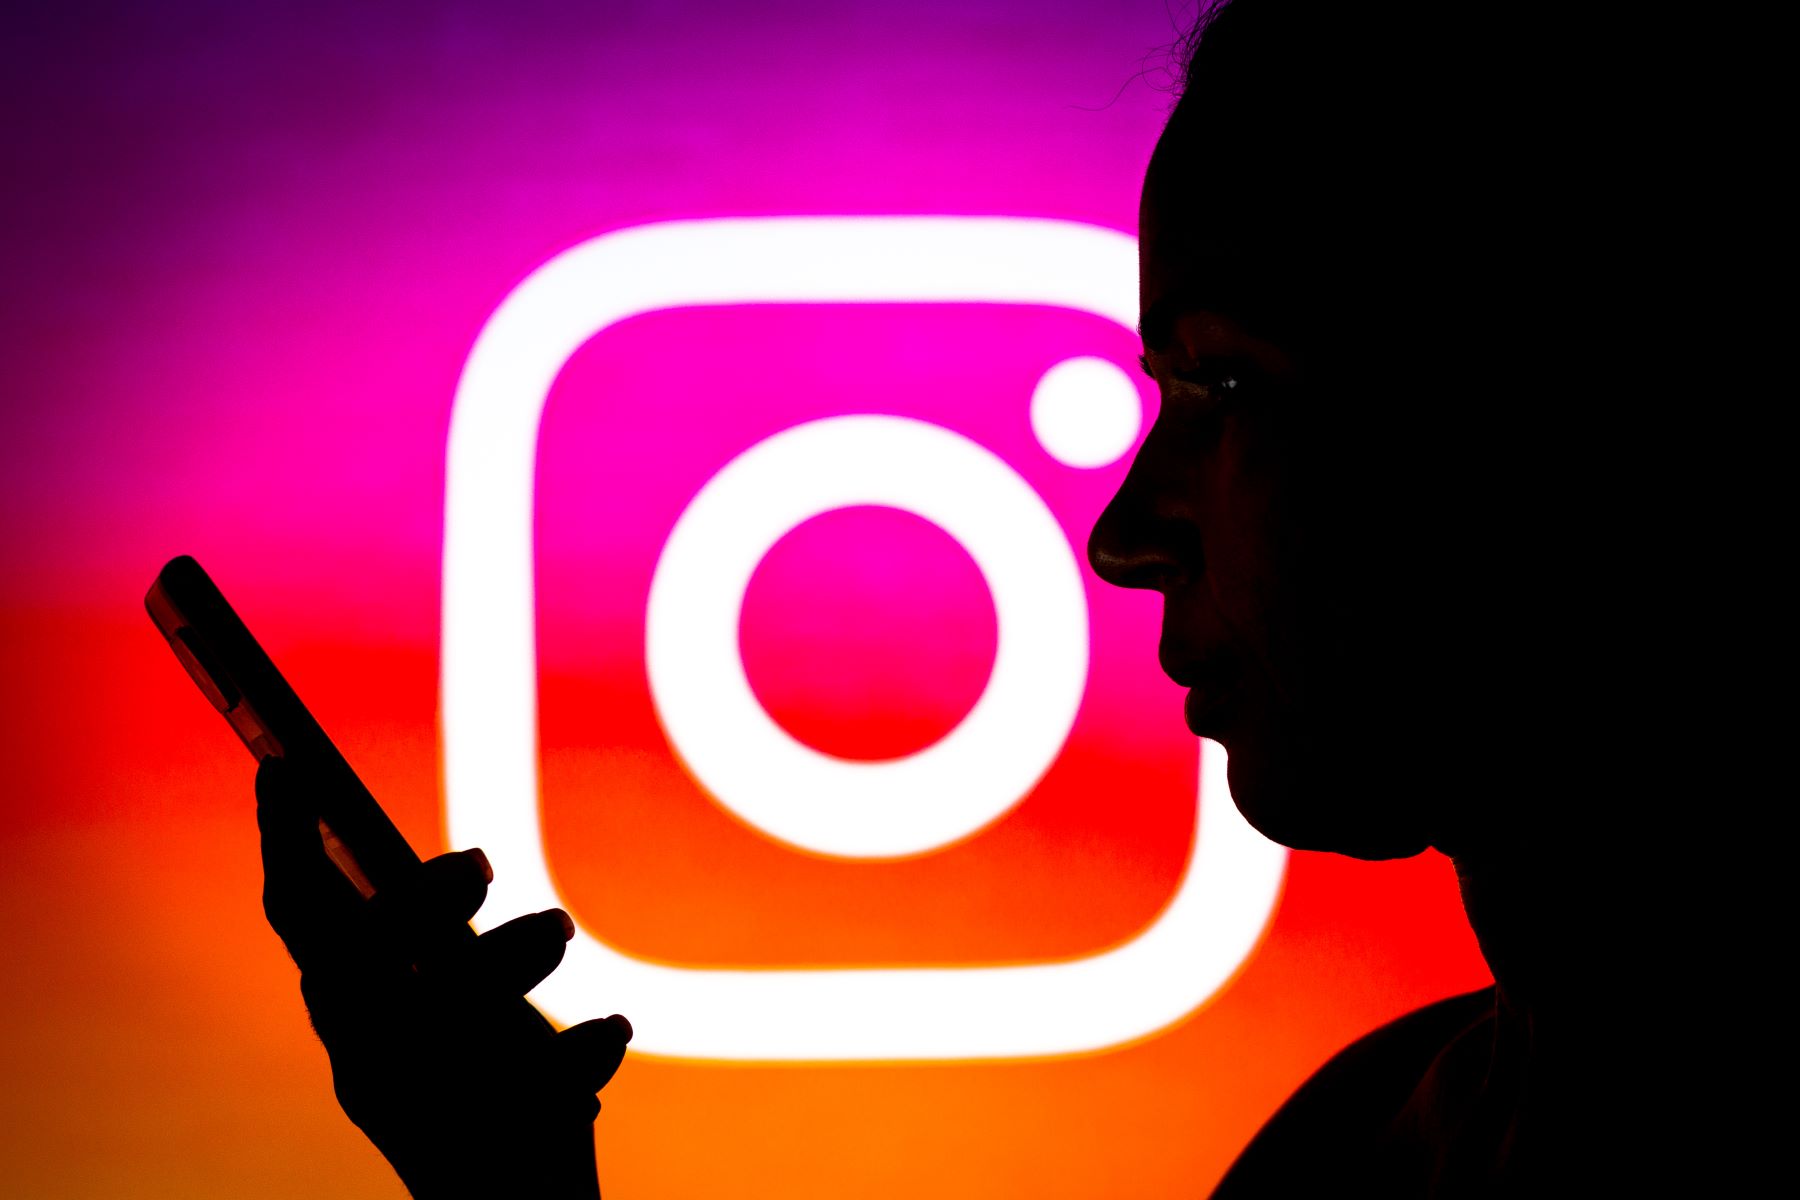 The Instagram logo behind a silhouette of a woman browsing her smartphone